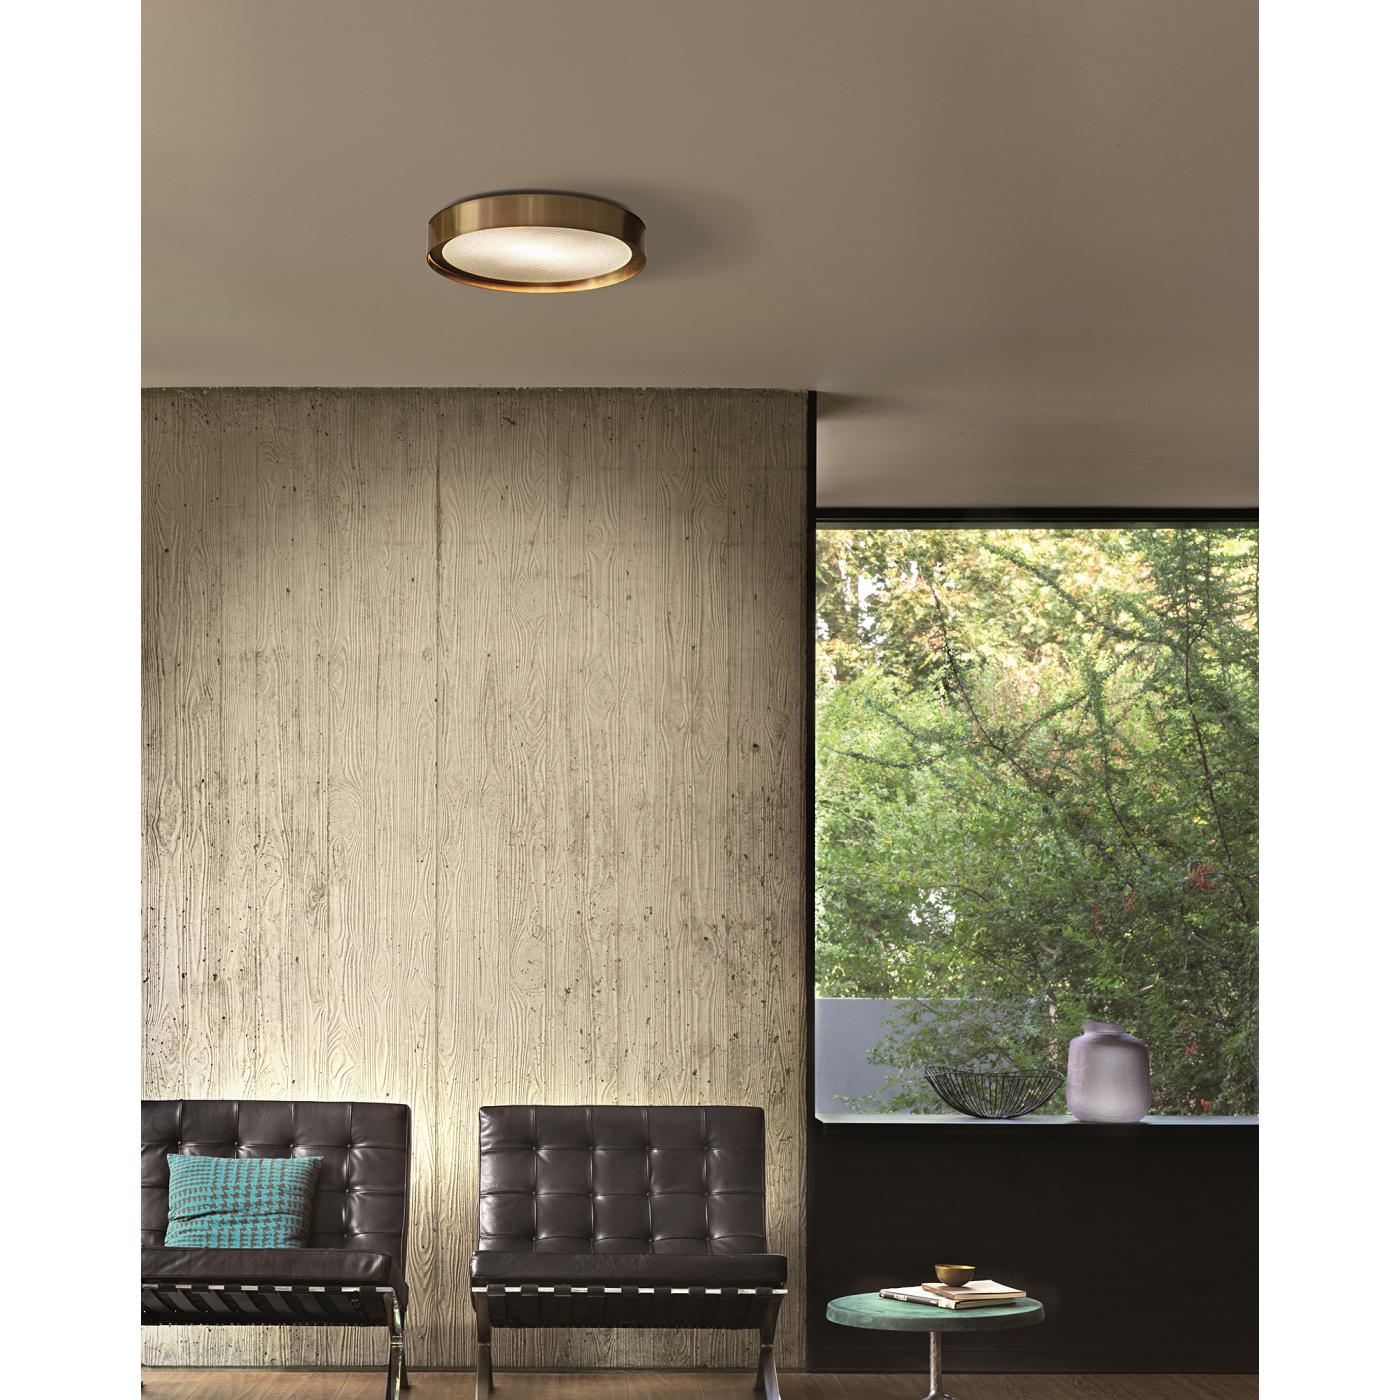 Italian Christophe Pillet Ceiling and Wall Lamp 'Berlin' Medium by Oluce For Sale